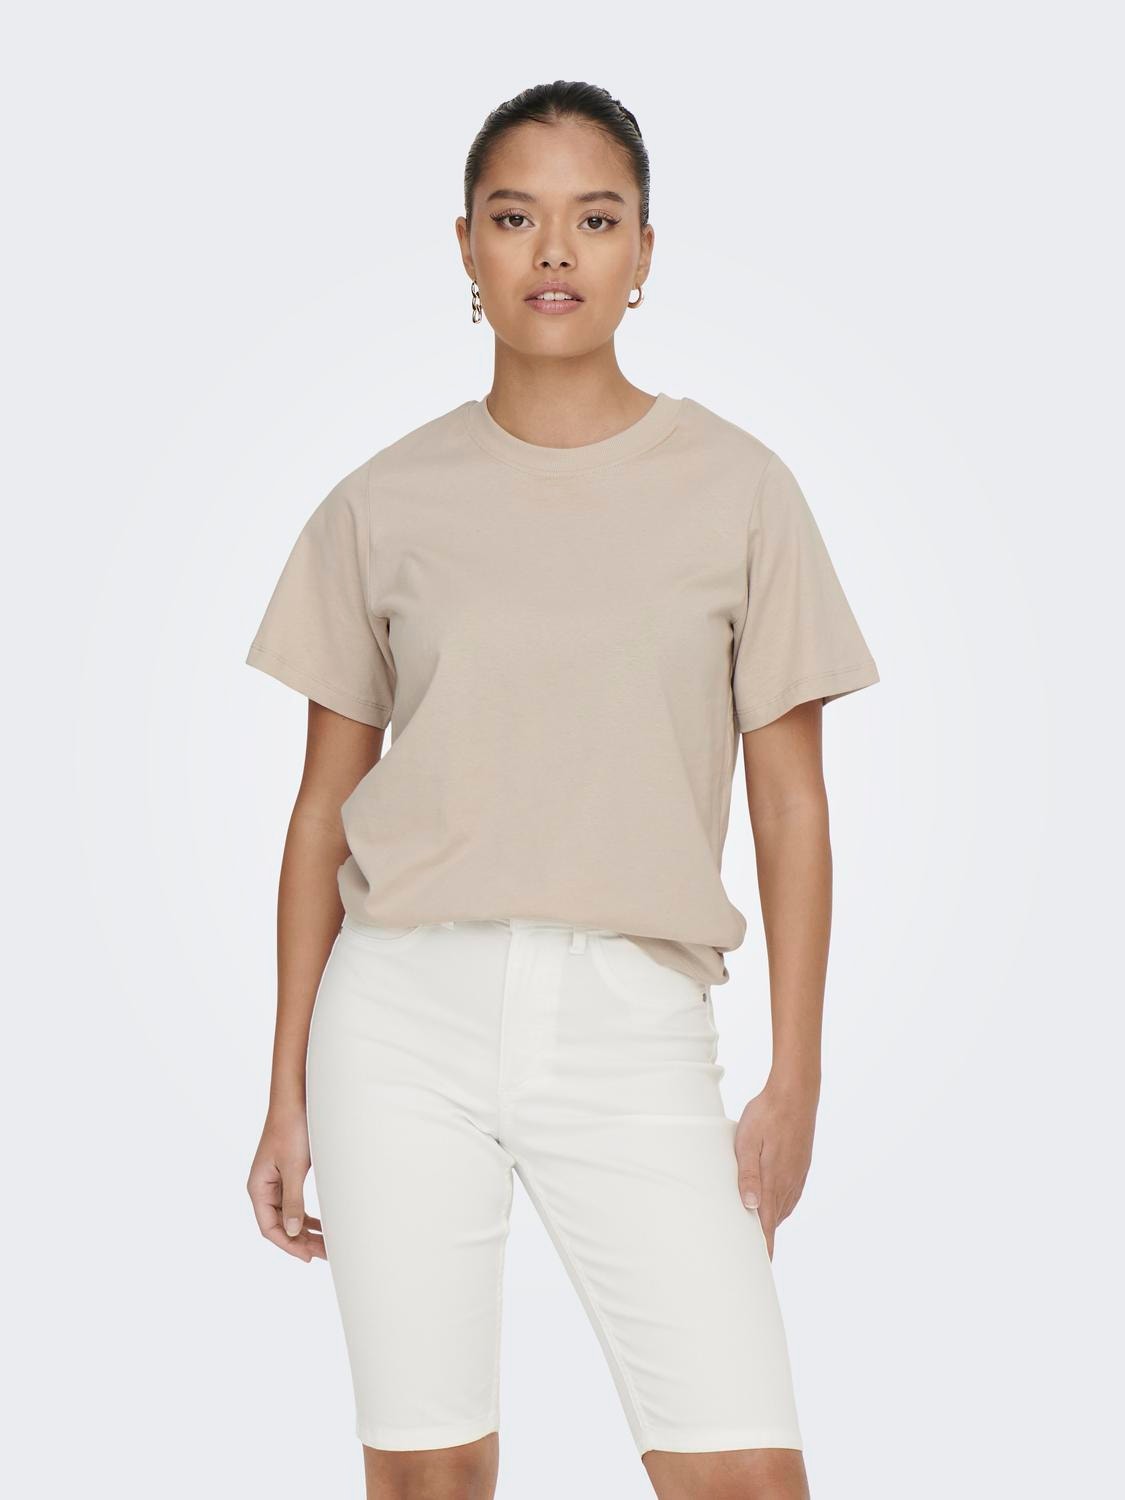 ONLY Regular Fit Round Neck T-Shirt -Chateau Gray - 15292431